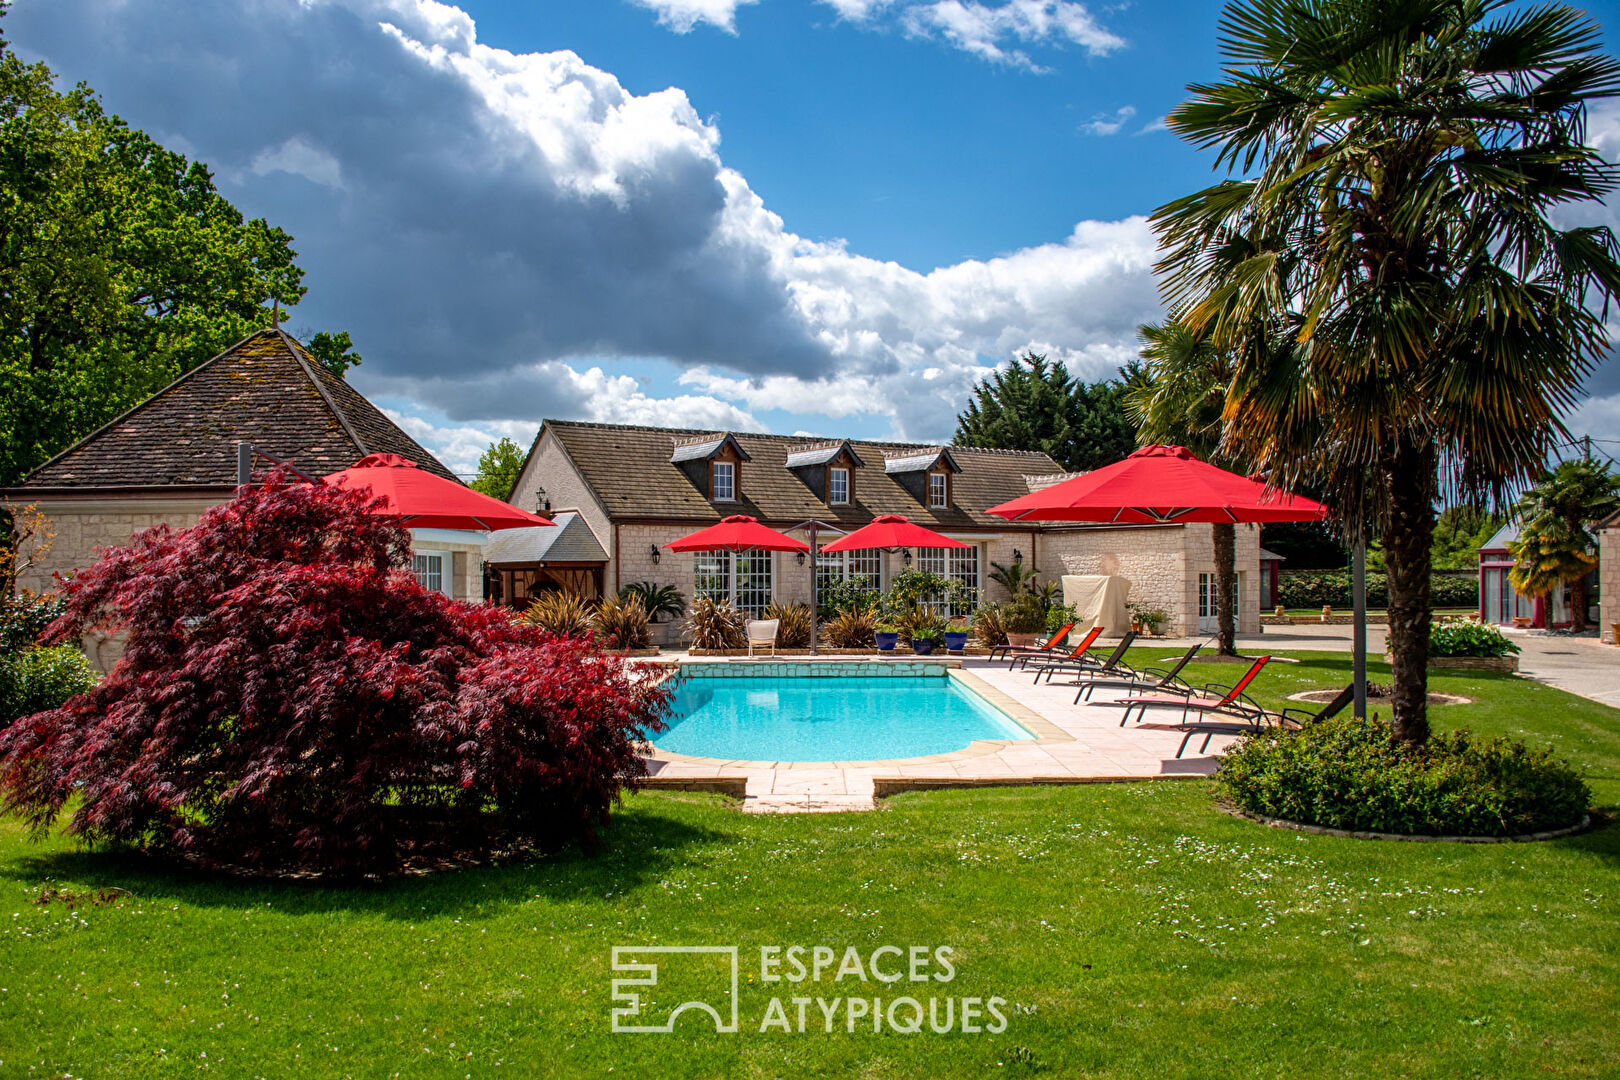 Elegant property with swimming pool, tennis and outbuildings